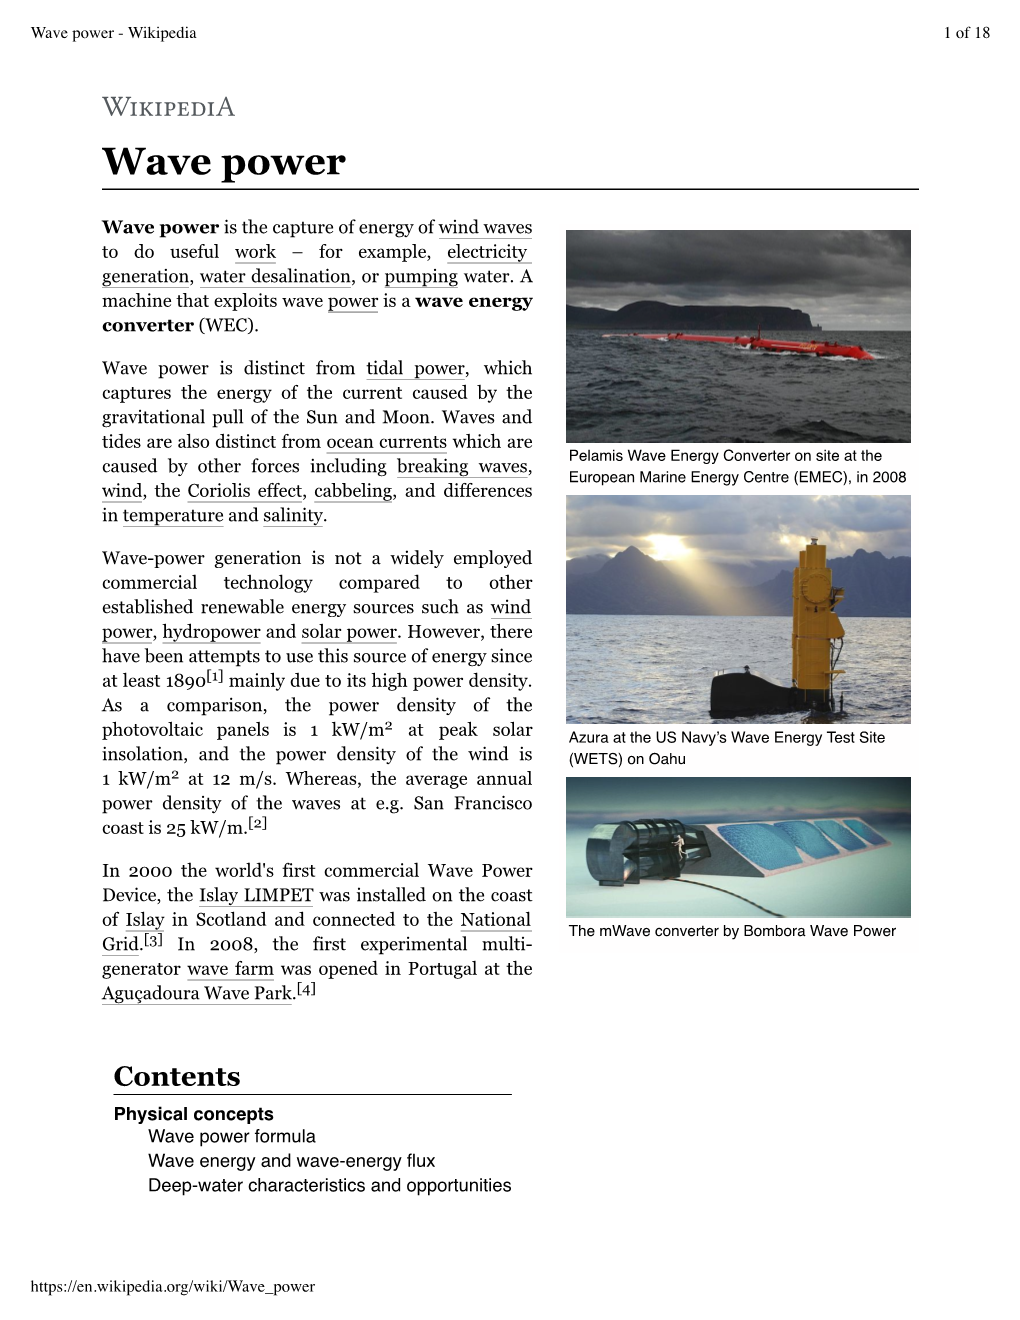 Wave Power - Wikipedia 1 of 18